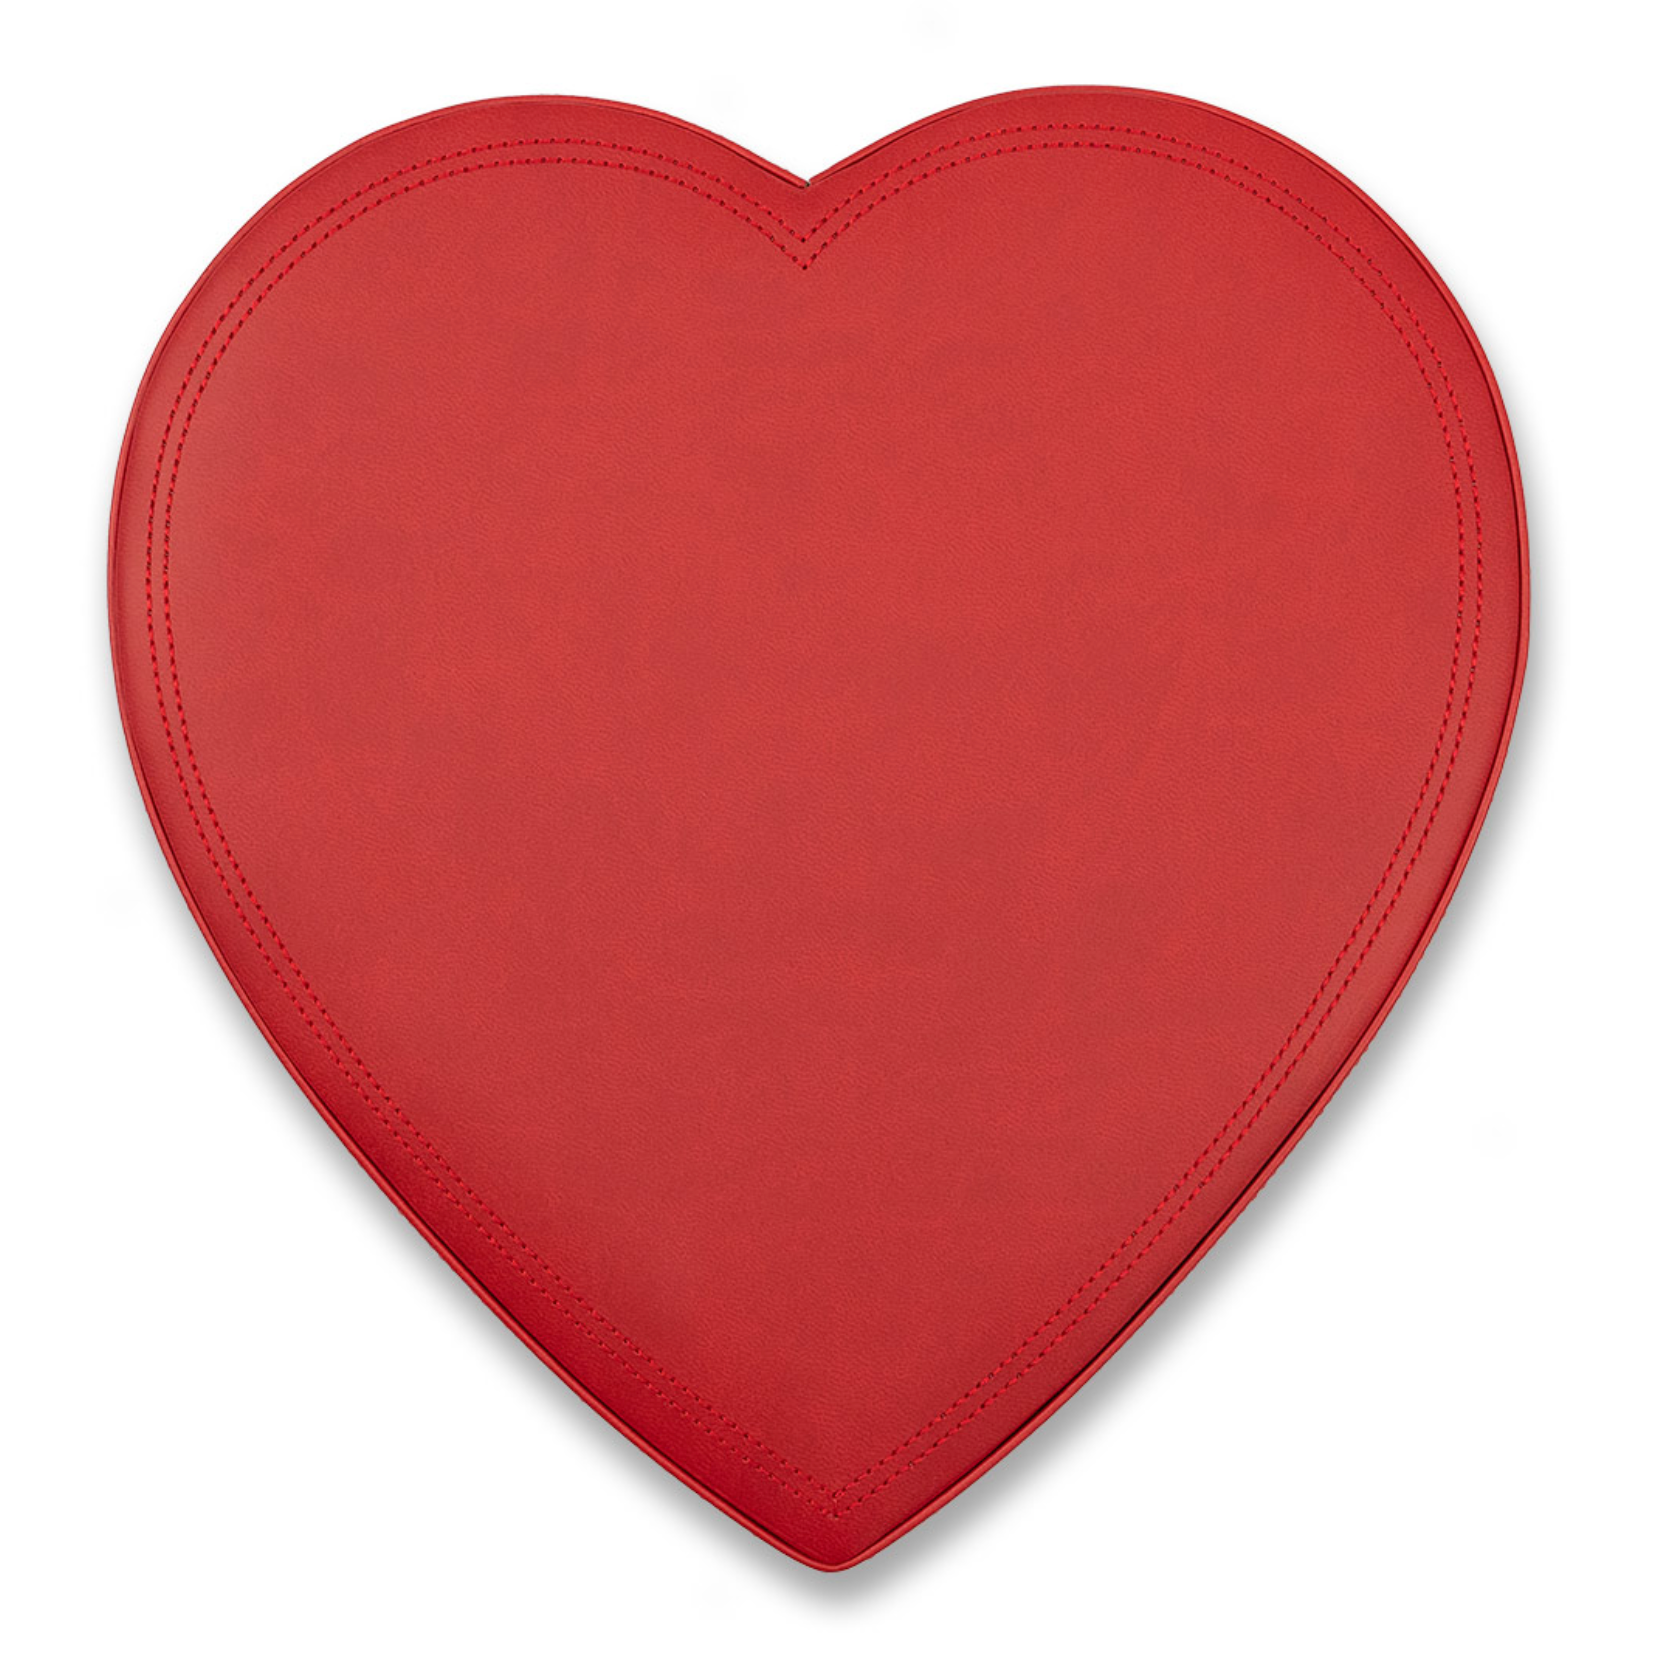 Red Leather Heart Box (1lb) - Edelweiss Chocolates - Gourmet Premium Handmade Chocolates made in Beverly Hills and Los Angeles